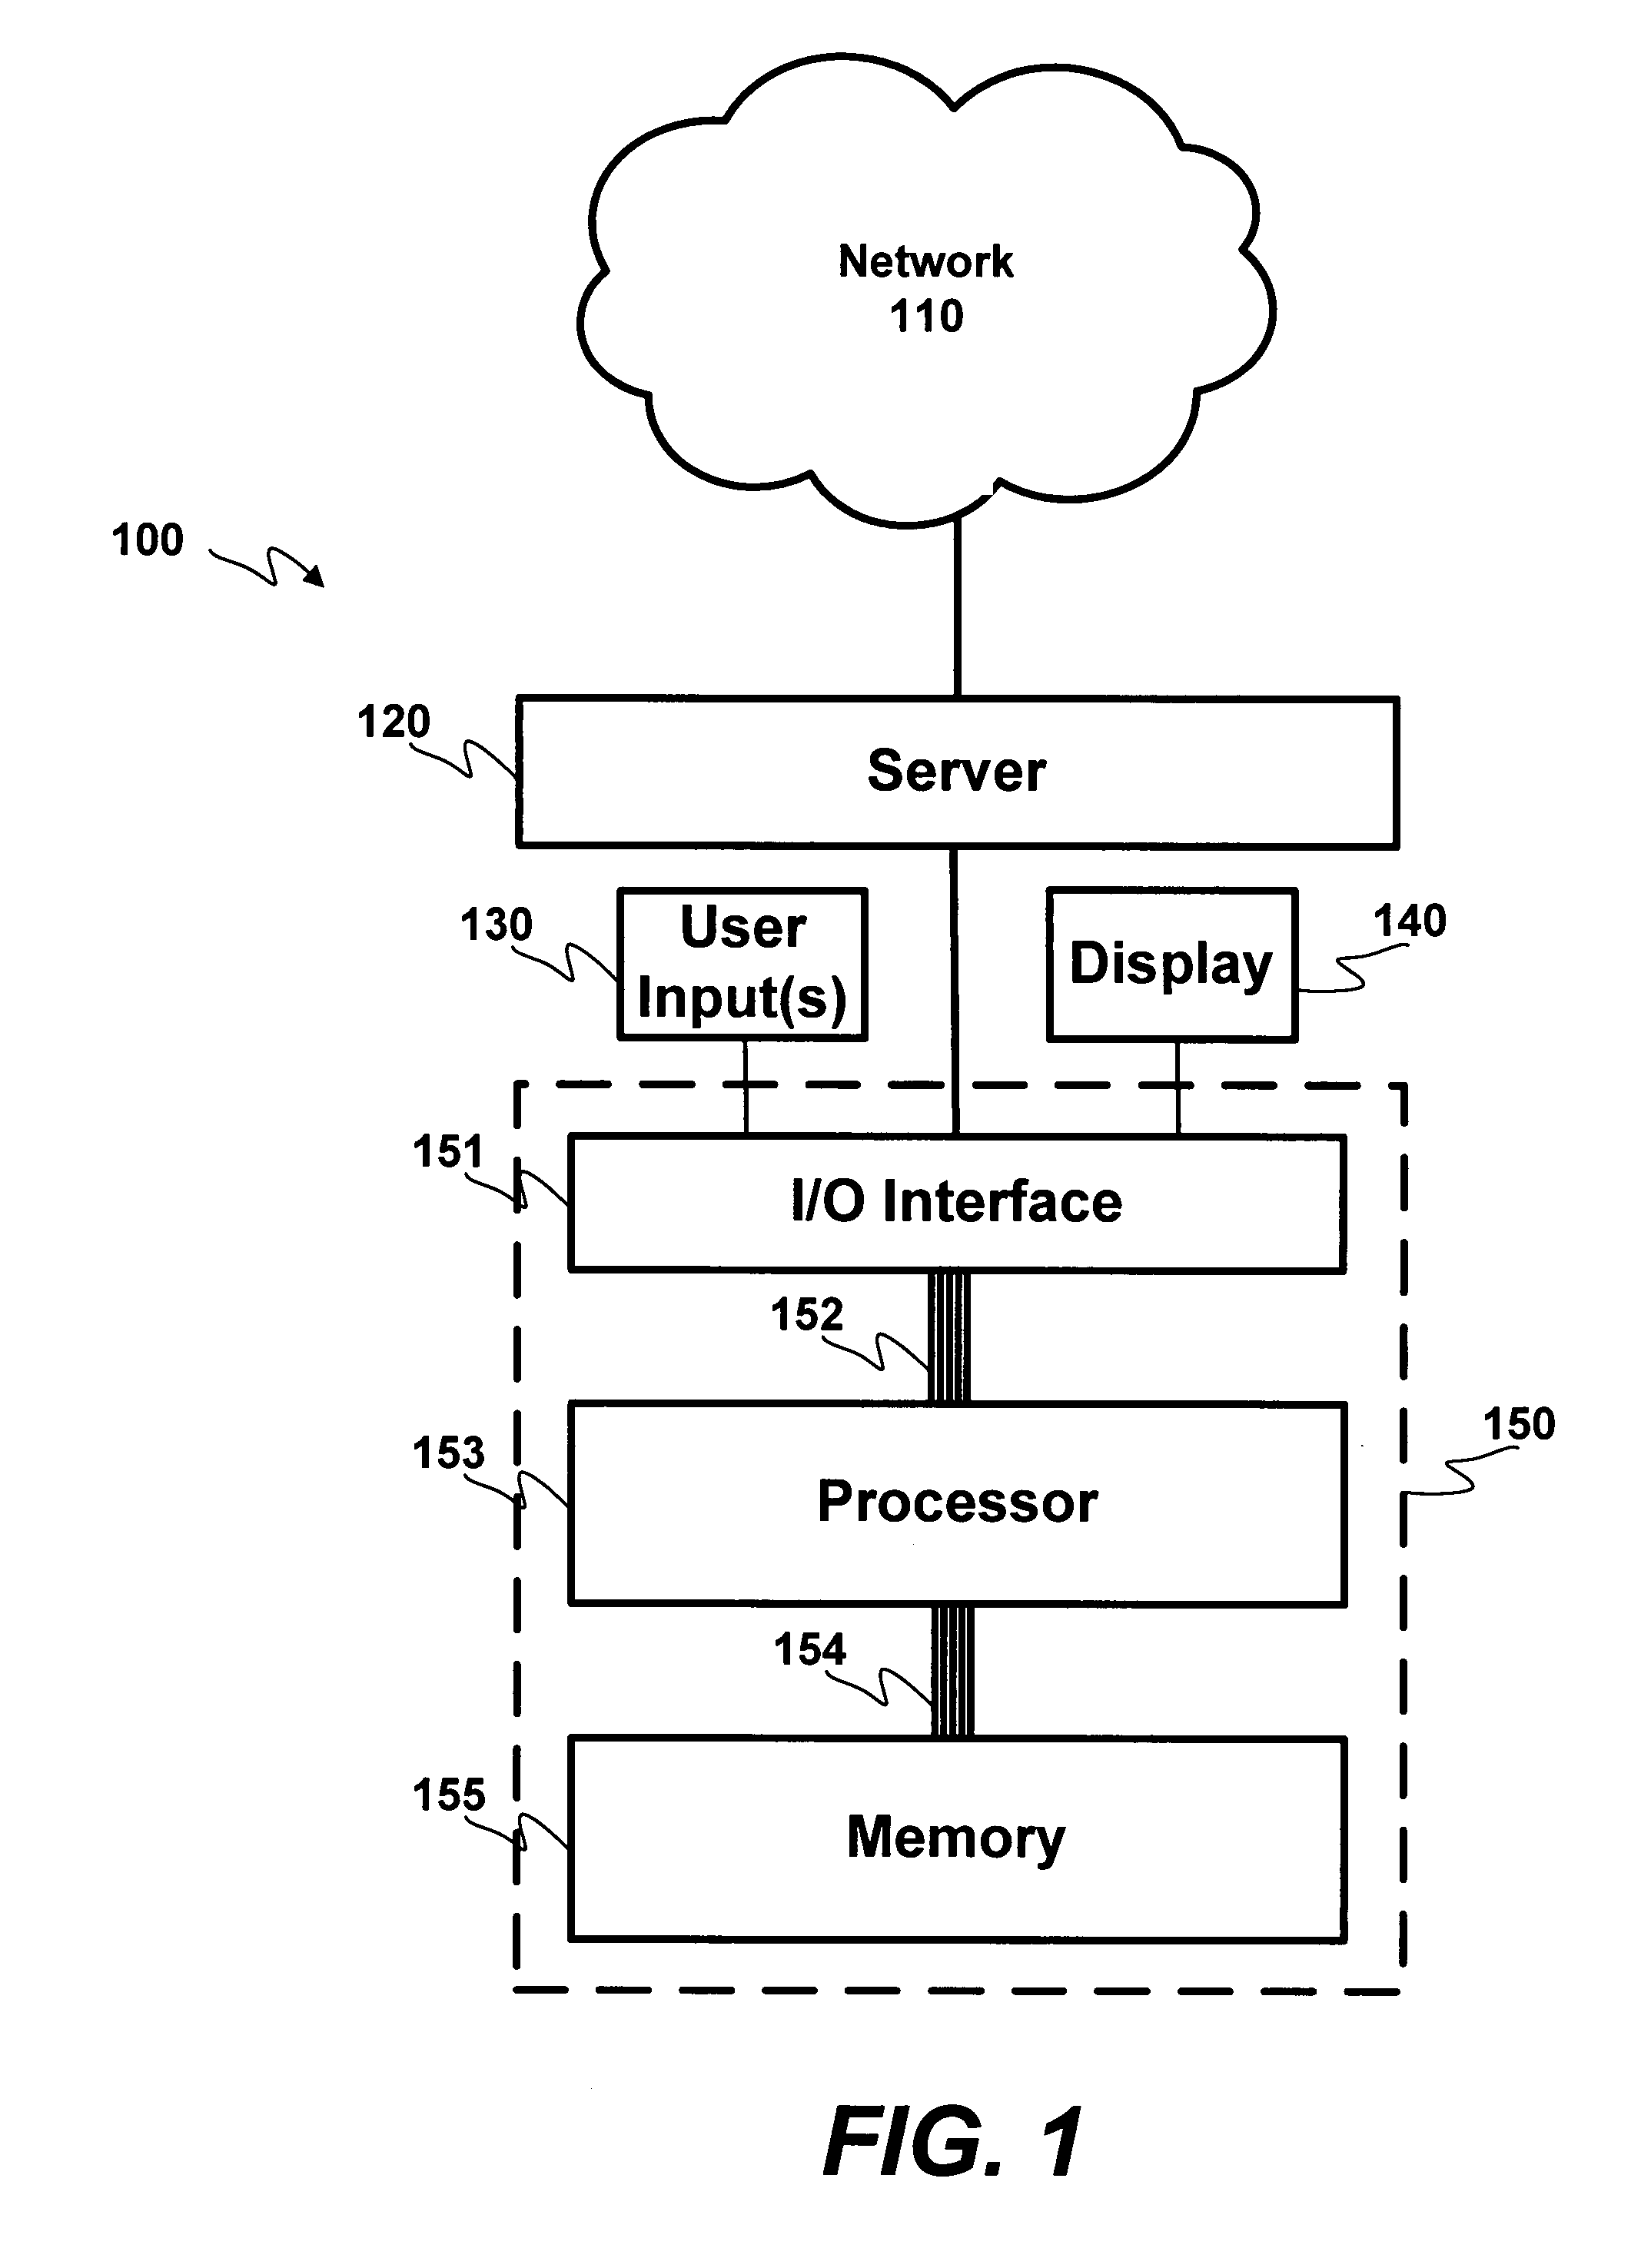 Apparatus and methods for image restoration